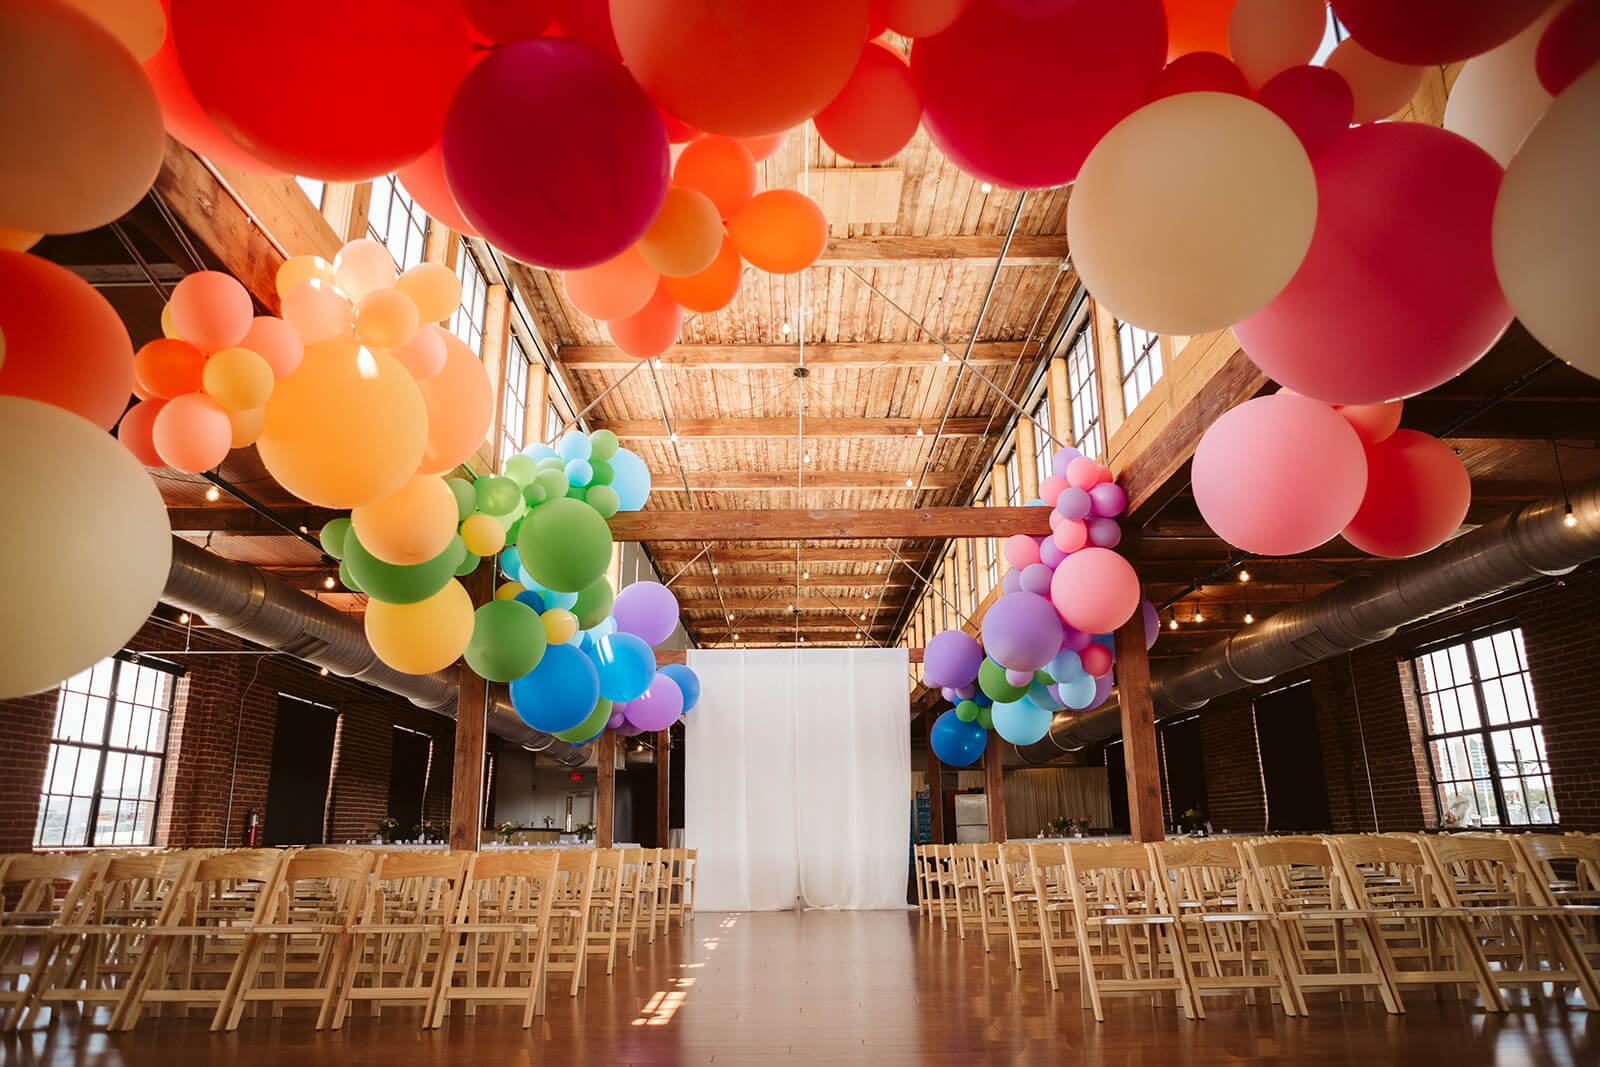 Weddings using the both floors of the Turnbull Building. Photo by OkCrowe Phtography.